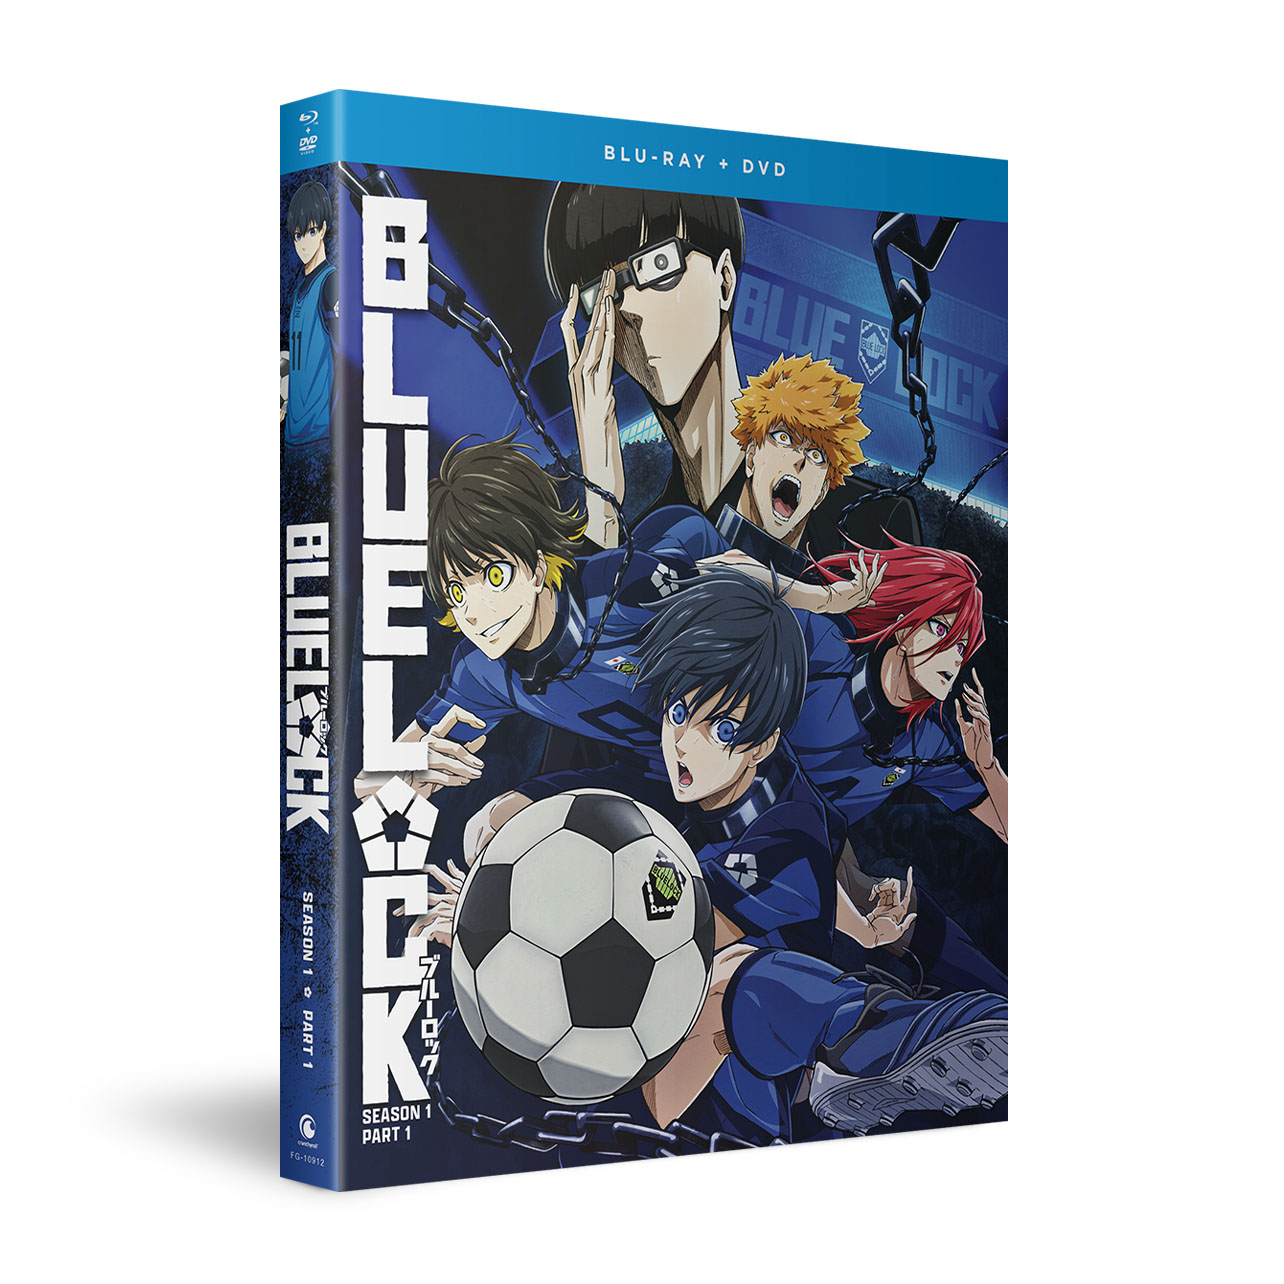 BLUELOCK - Part 1 - Blu-ray + DVD image count 2